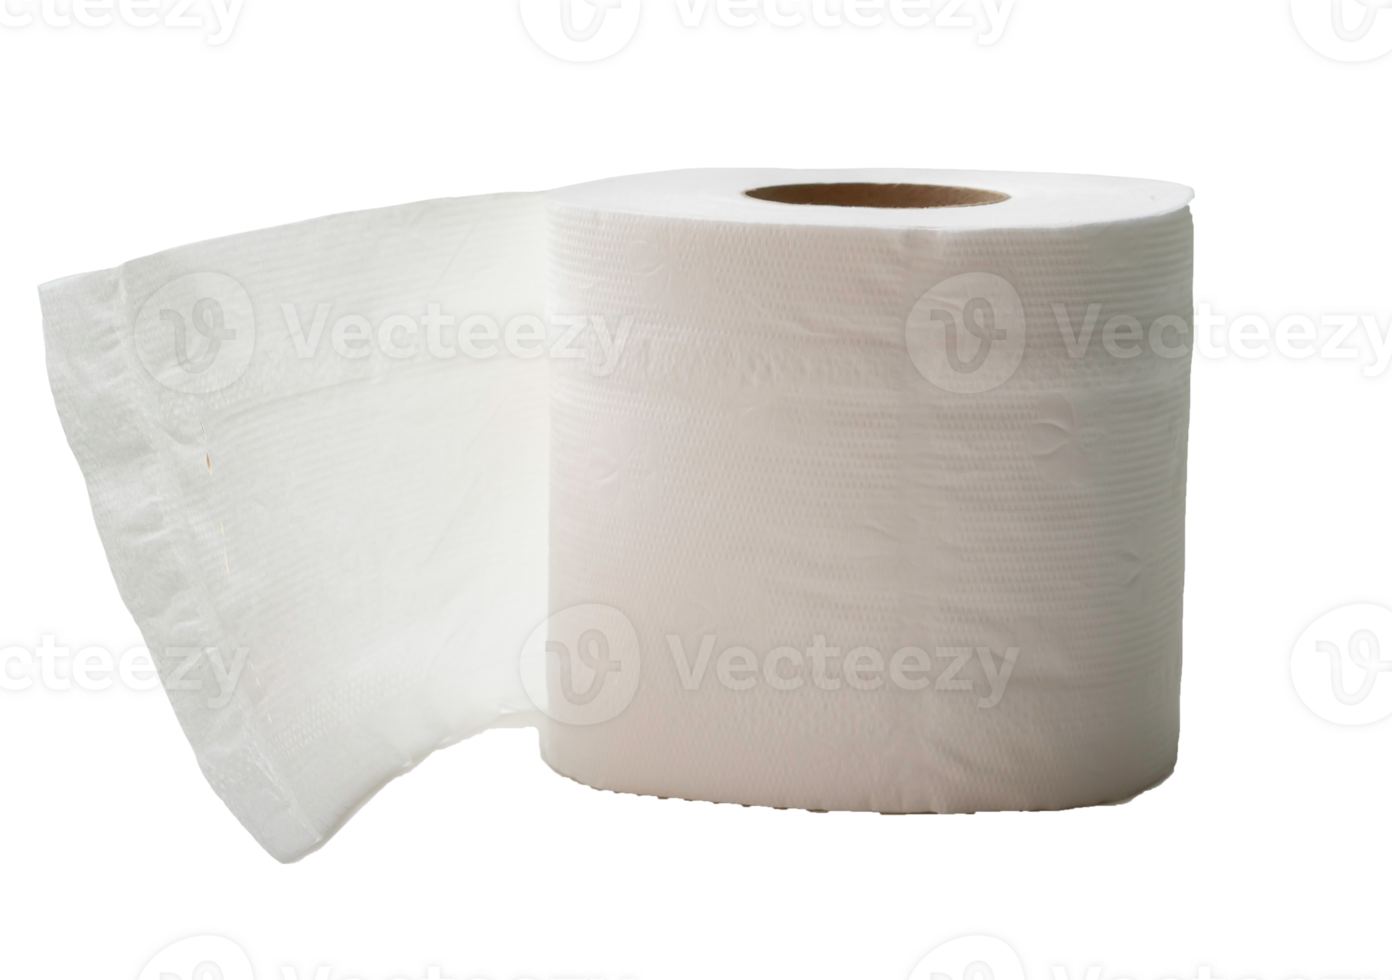 Single roll of white tissue paper or napkin prepared for use in toilet or restroom isolated with clipping path in png file format.